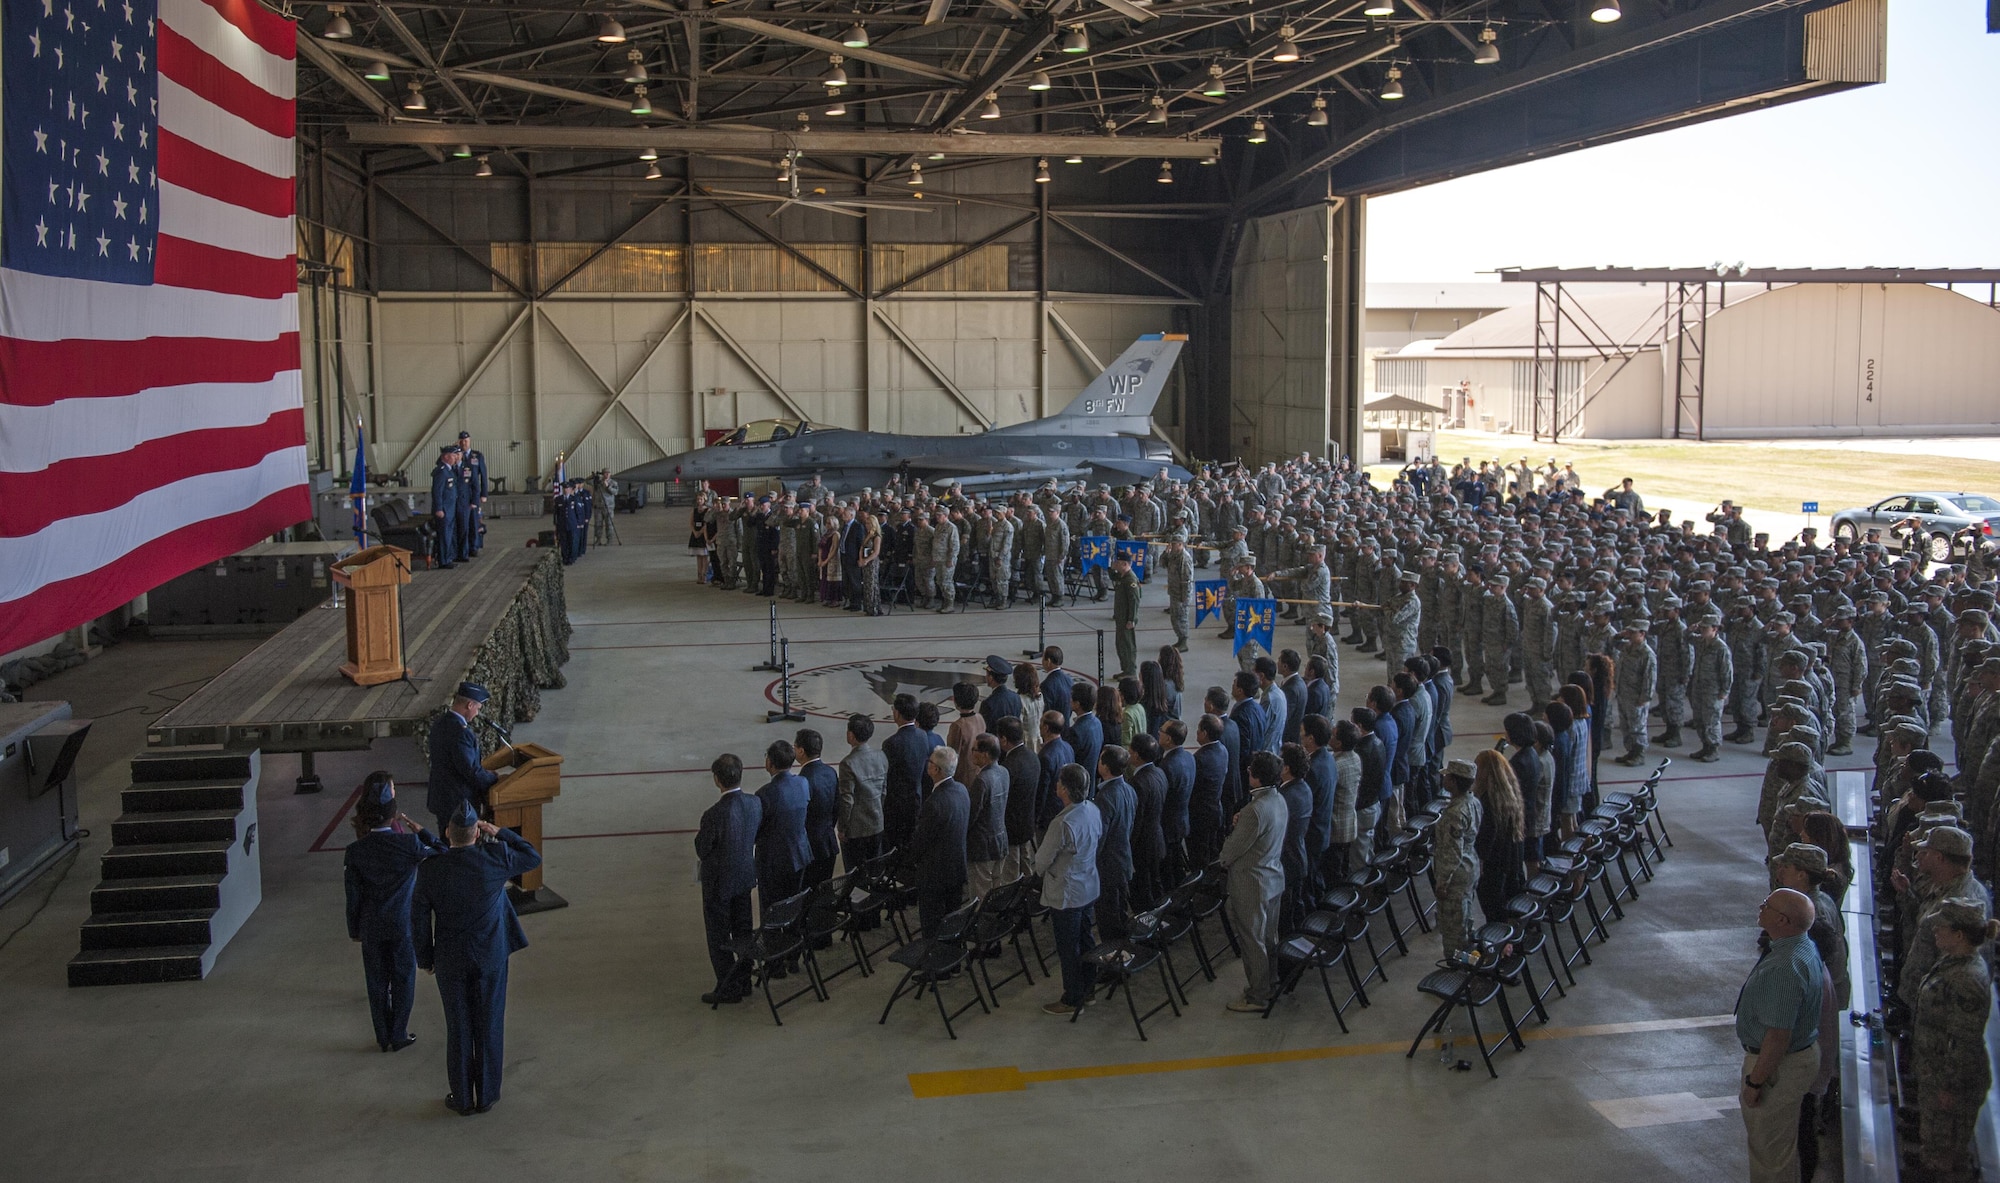 Members of the Wolf Pack stand at attention as the official party takes the stage during the 8th Fighter Wing change of command ceremony at Kunsan Air Base, Republic of Korea, May 25, 2017. Col. Todd A. Dozier relinquished command to Col. David G. Shoemaker. Shoemaker is the 57th commander to take the title of “Wolf.”  (U.S. Air Force photo by Senior Airman Colville McFee/Released)